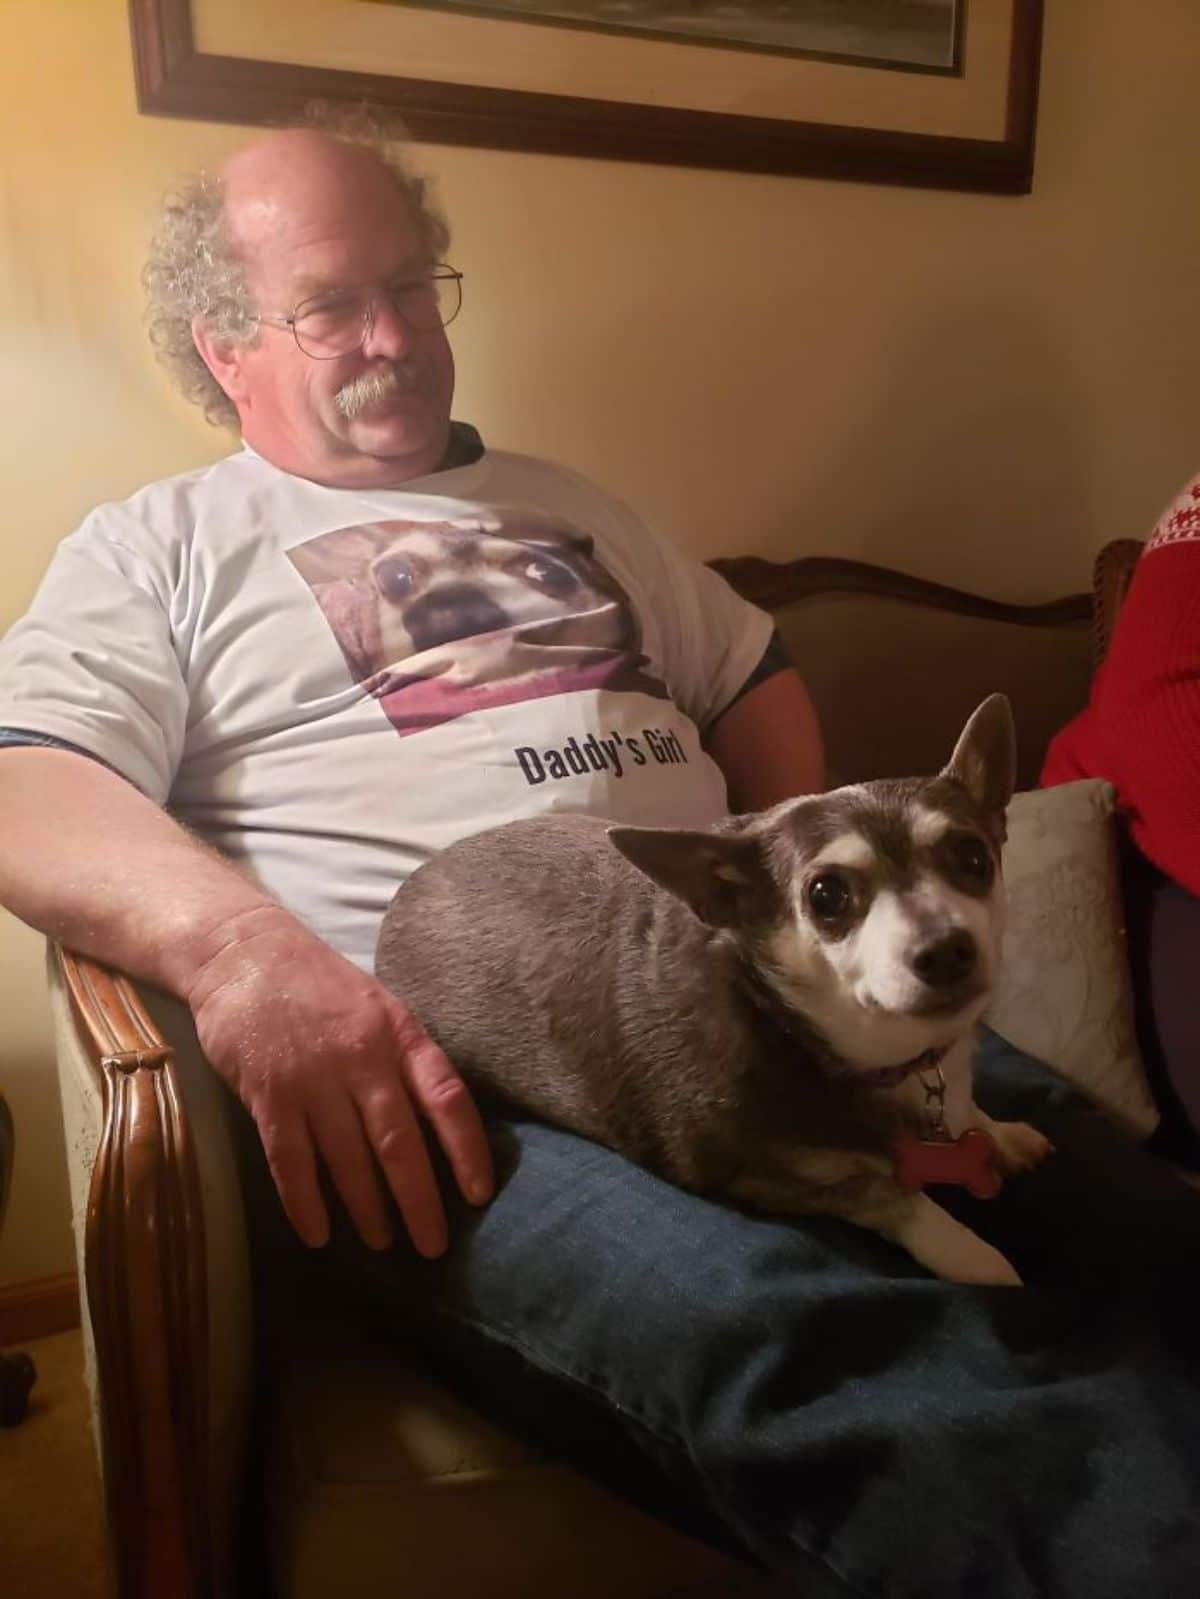 small brown and white dog sitting on an old man's lap with the dog's face printed on the man's shirt and under the photo in the shirt it says Daddy's Girl